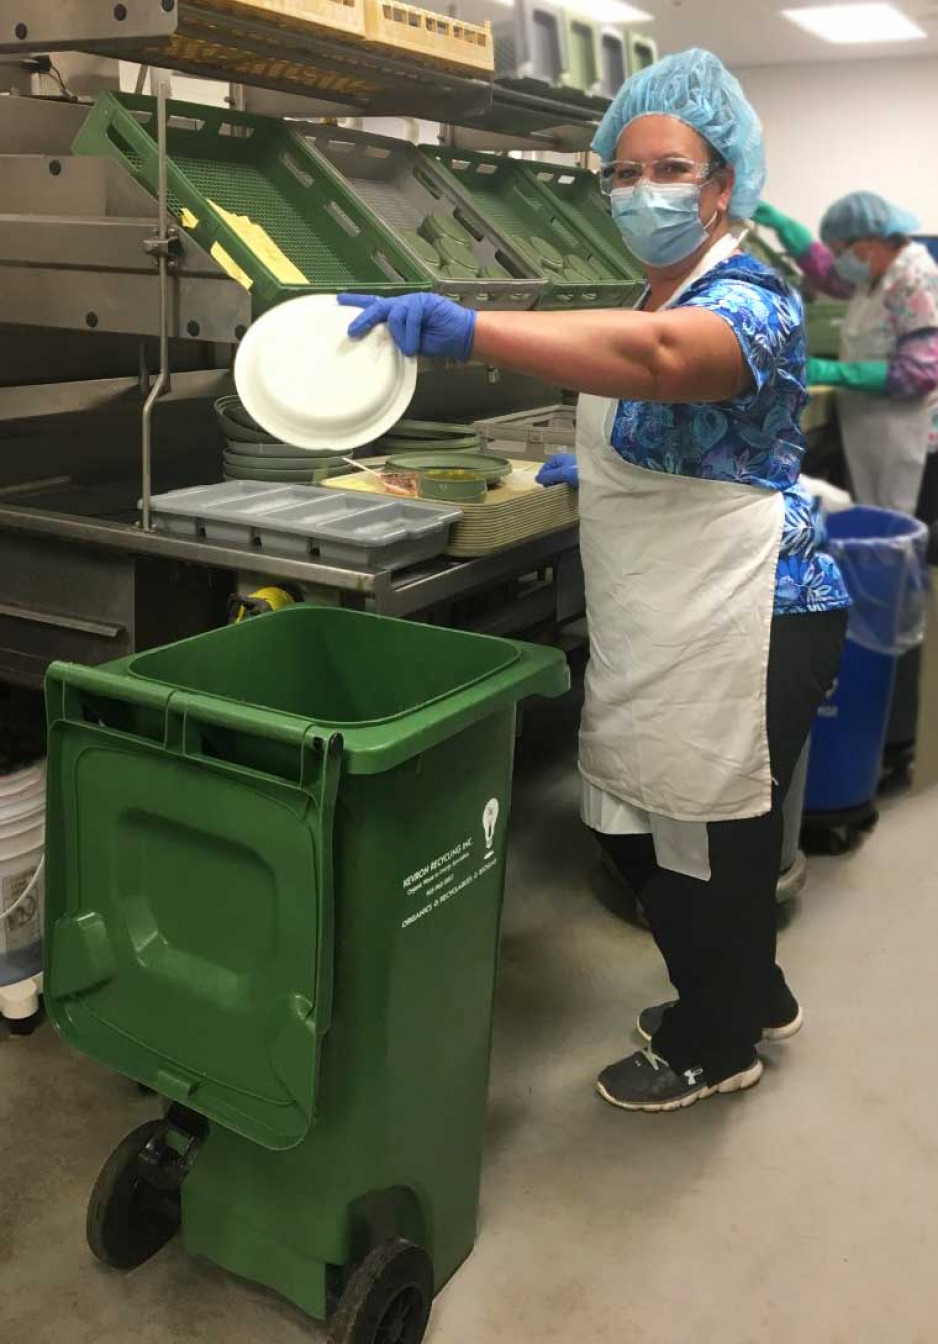 A food services worker in a hospital kitchen holding a plate over a green organics bin